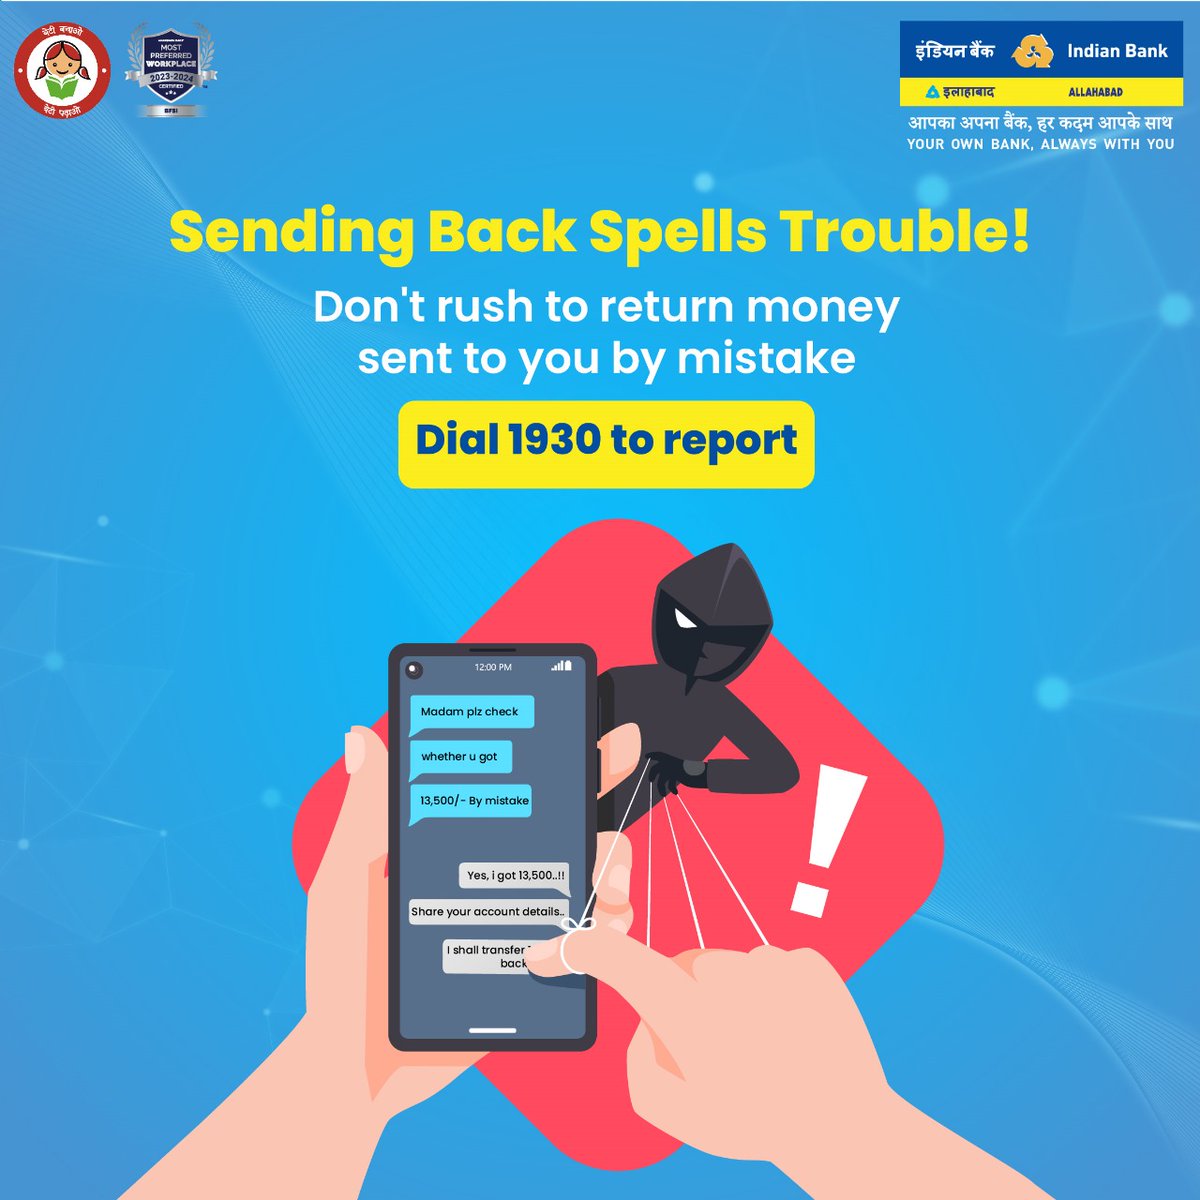 Avoid making immediate fund transfers upon anonymous requests, under the pretext of false credit. Double check your balance using your banking app and avoid trusting messages sent via SMS. 
Stay vigilant and report such frauds by dialing 1930.
#IndianBank 
@DFS_India @Cyberdost